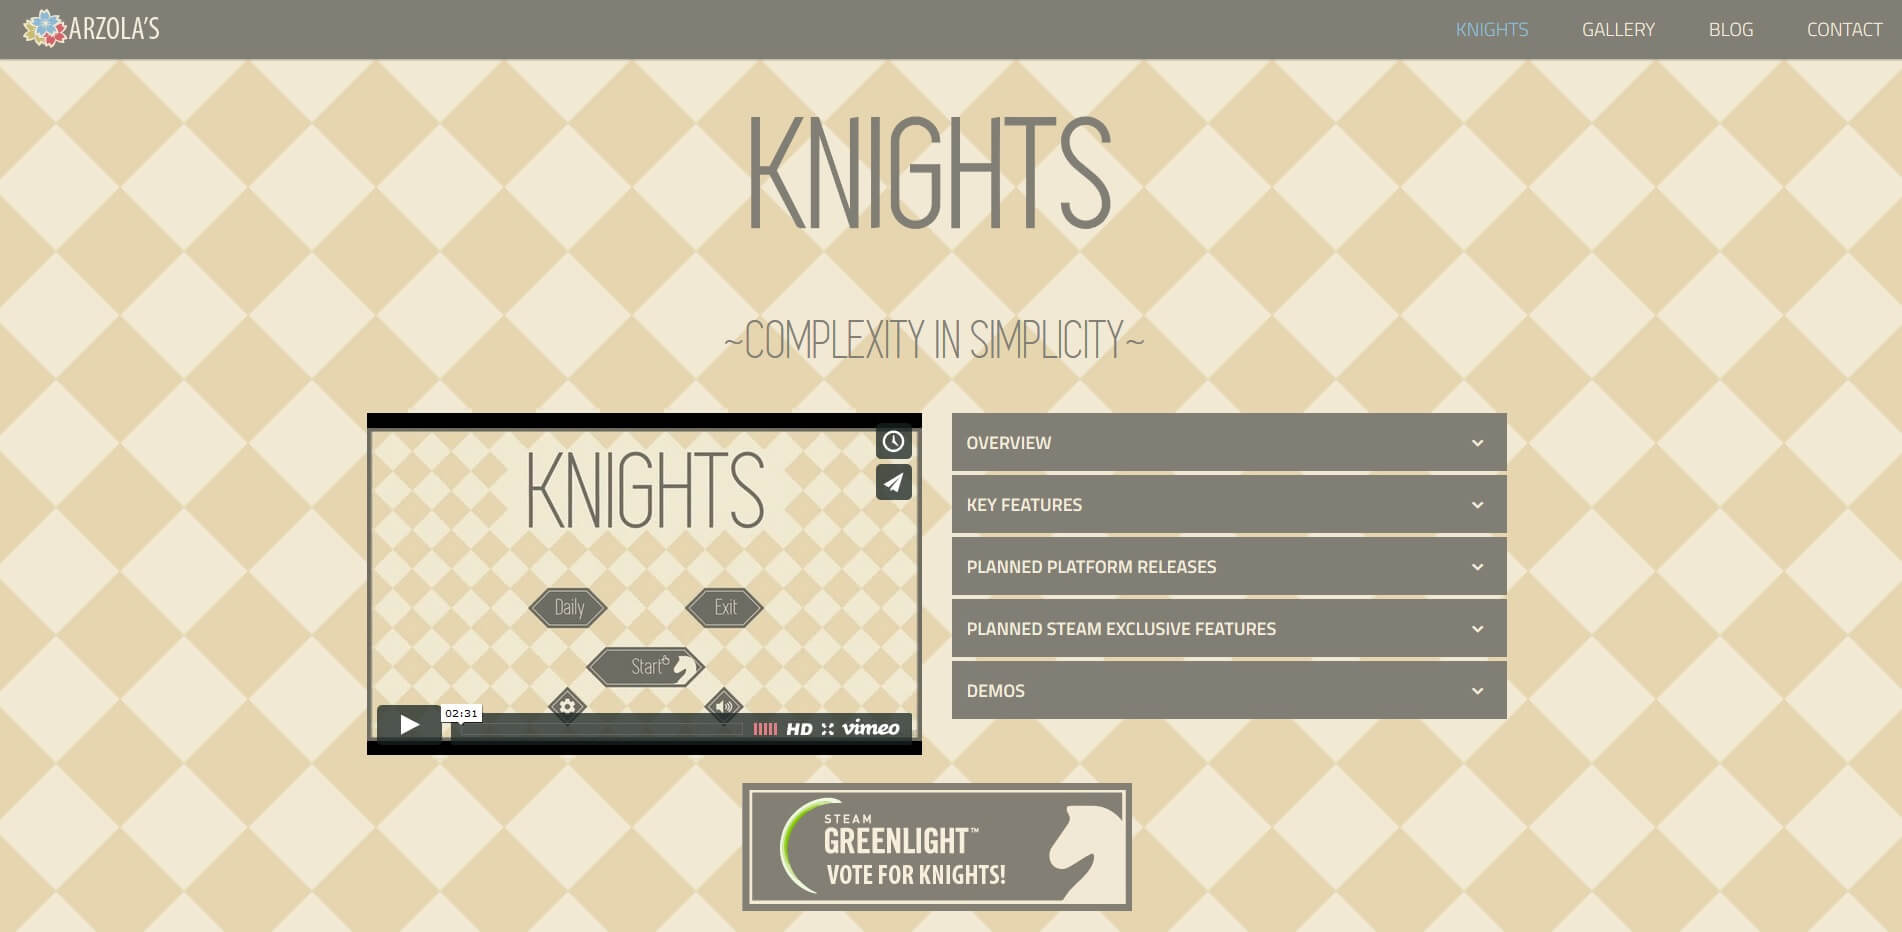 KNIGHTS Website Finished